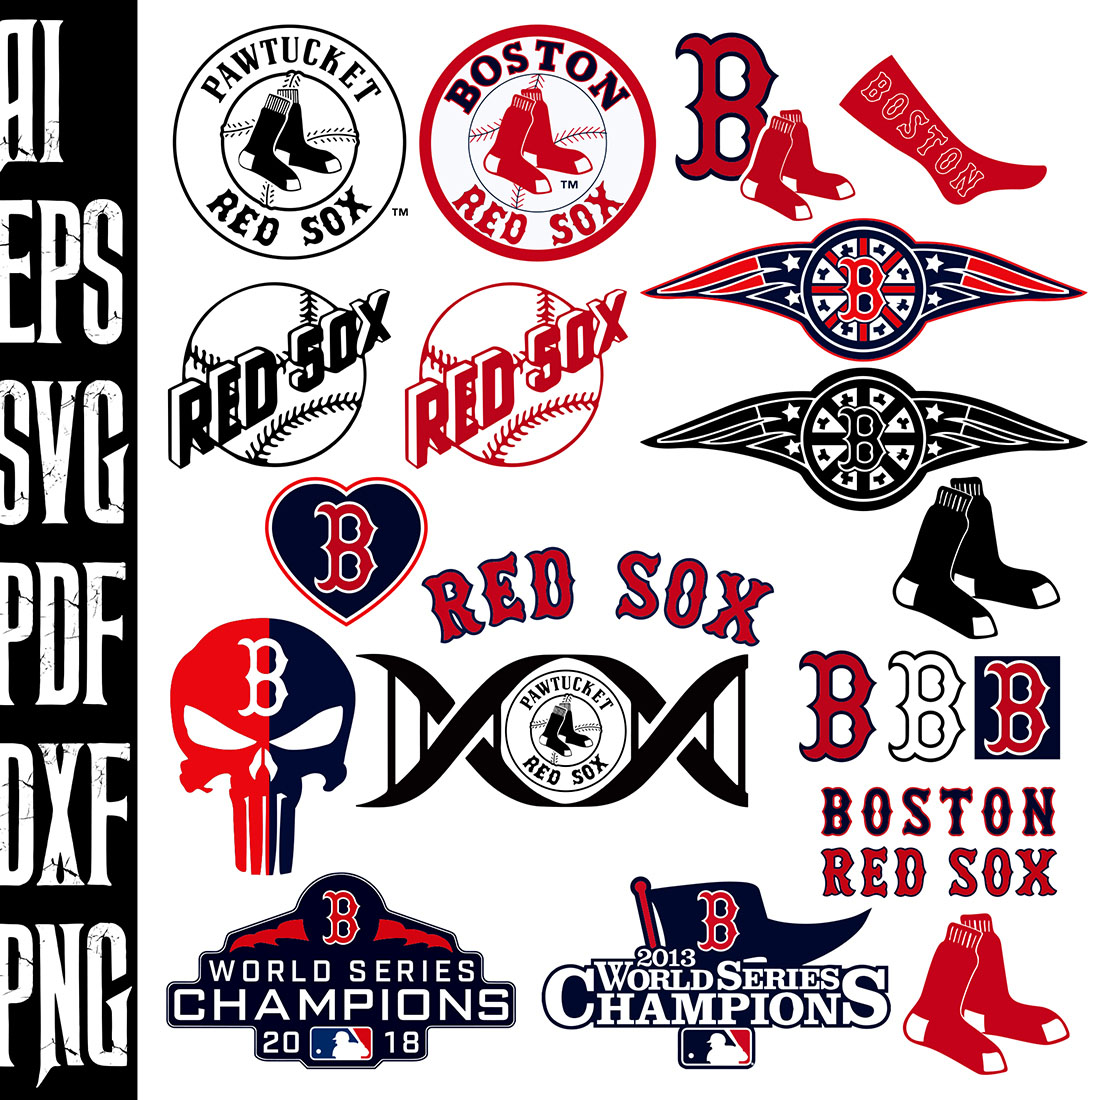 Boston Red Sox Famous Brand Blue Logo SVG cover image.